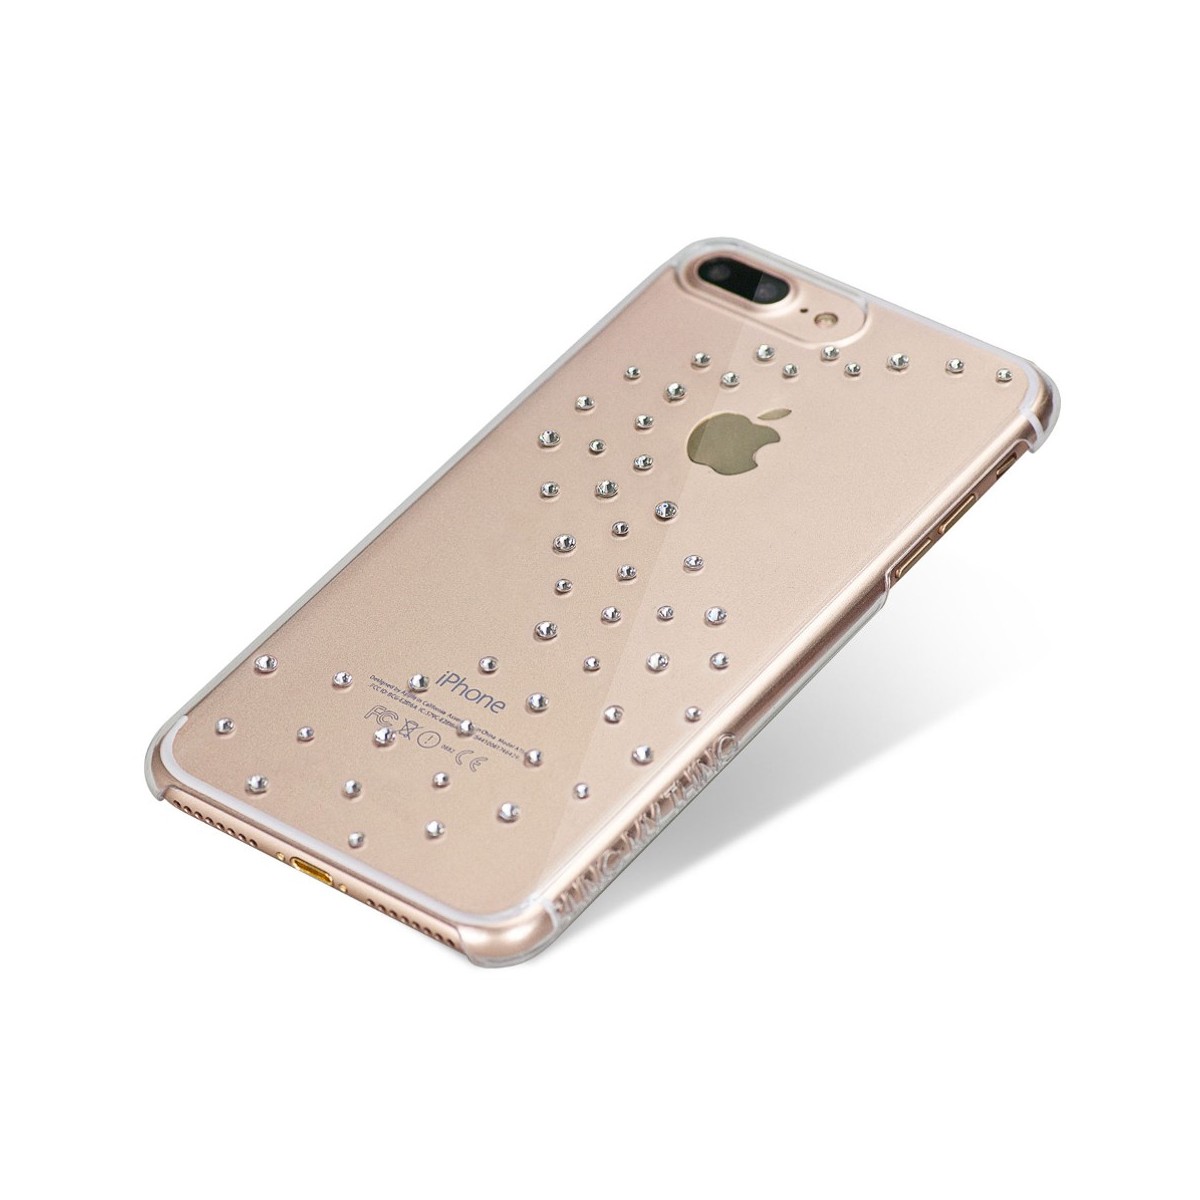 Coque iPhone 7 Plus Milky Way Pure Brillance Strass Cristal Swarovski - Bling My Thing